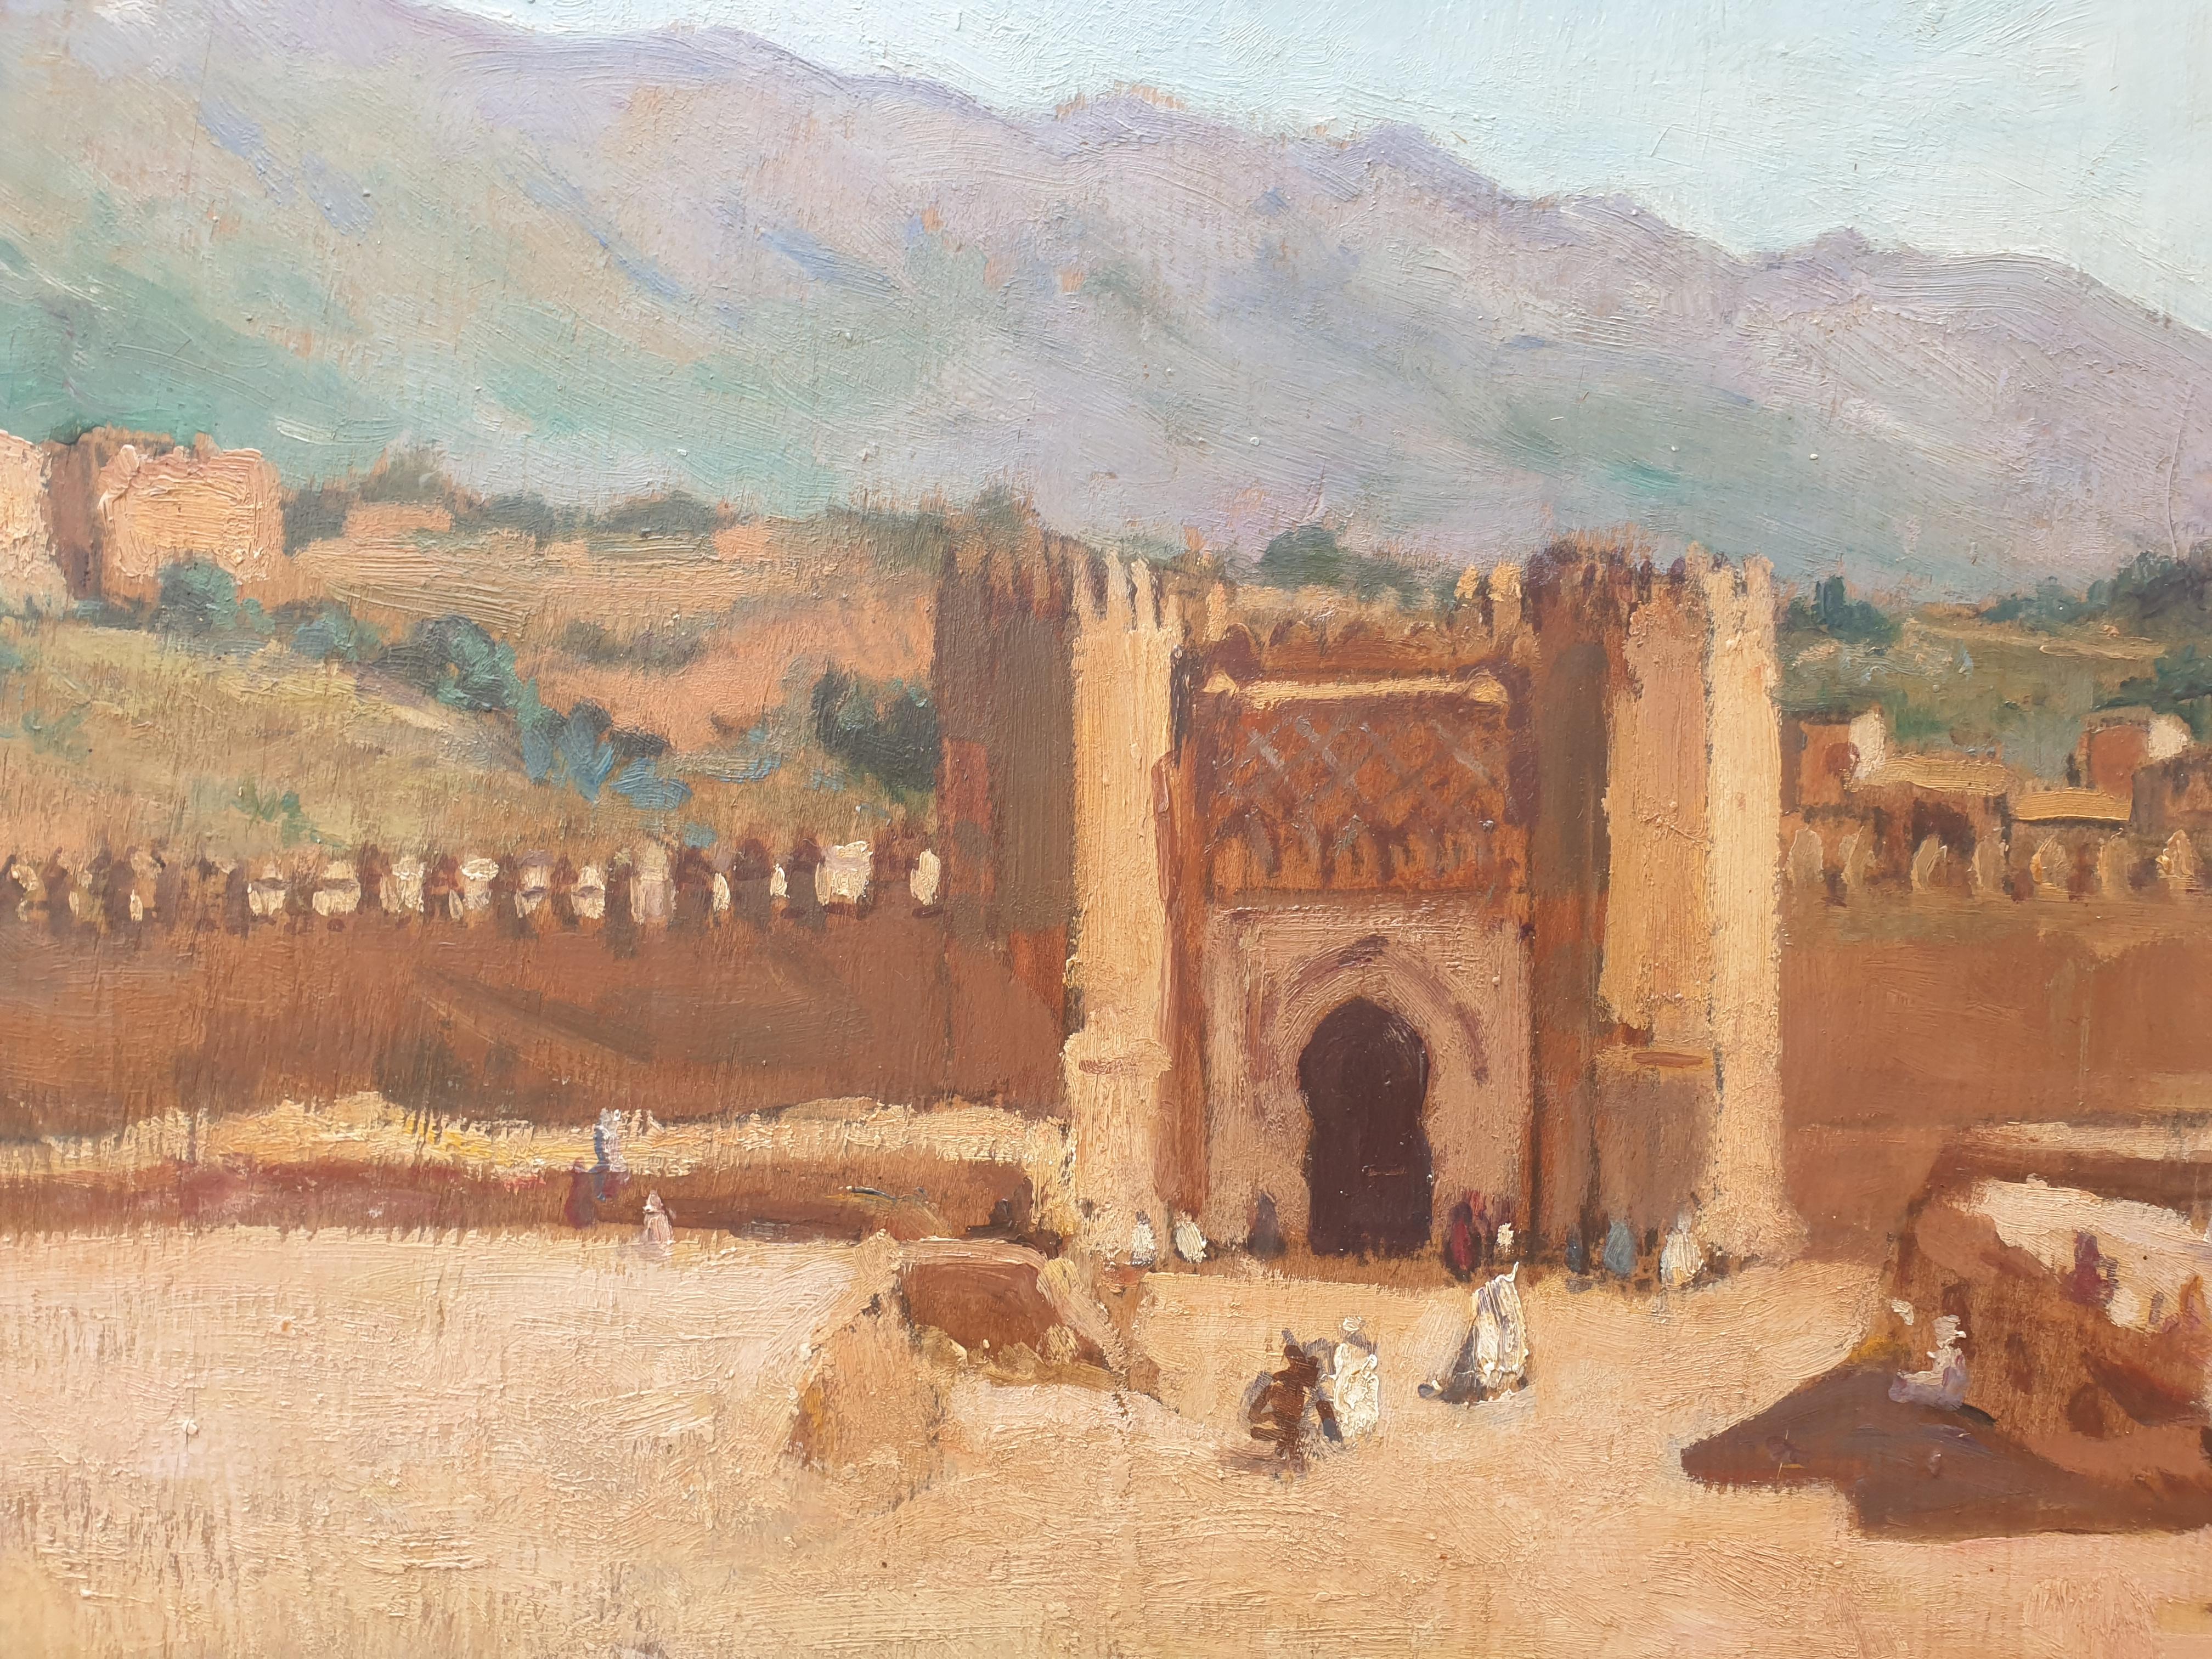 Painting orientalist REY with PONTOY Marocco Fez Boujloud square Bab Gate  3